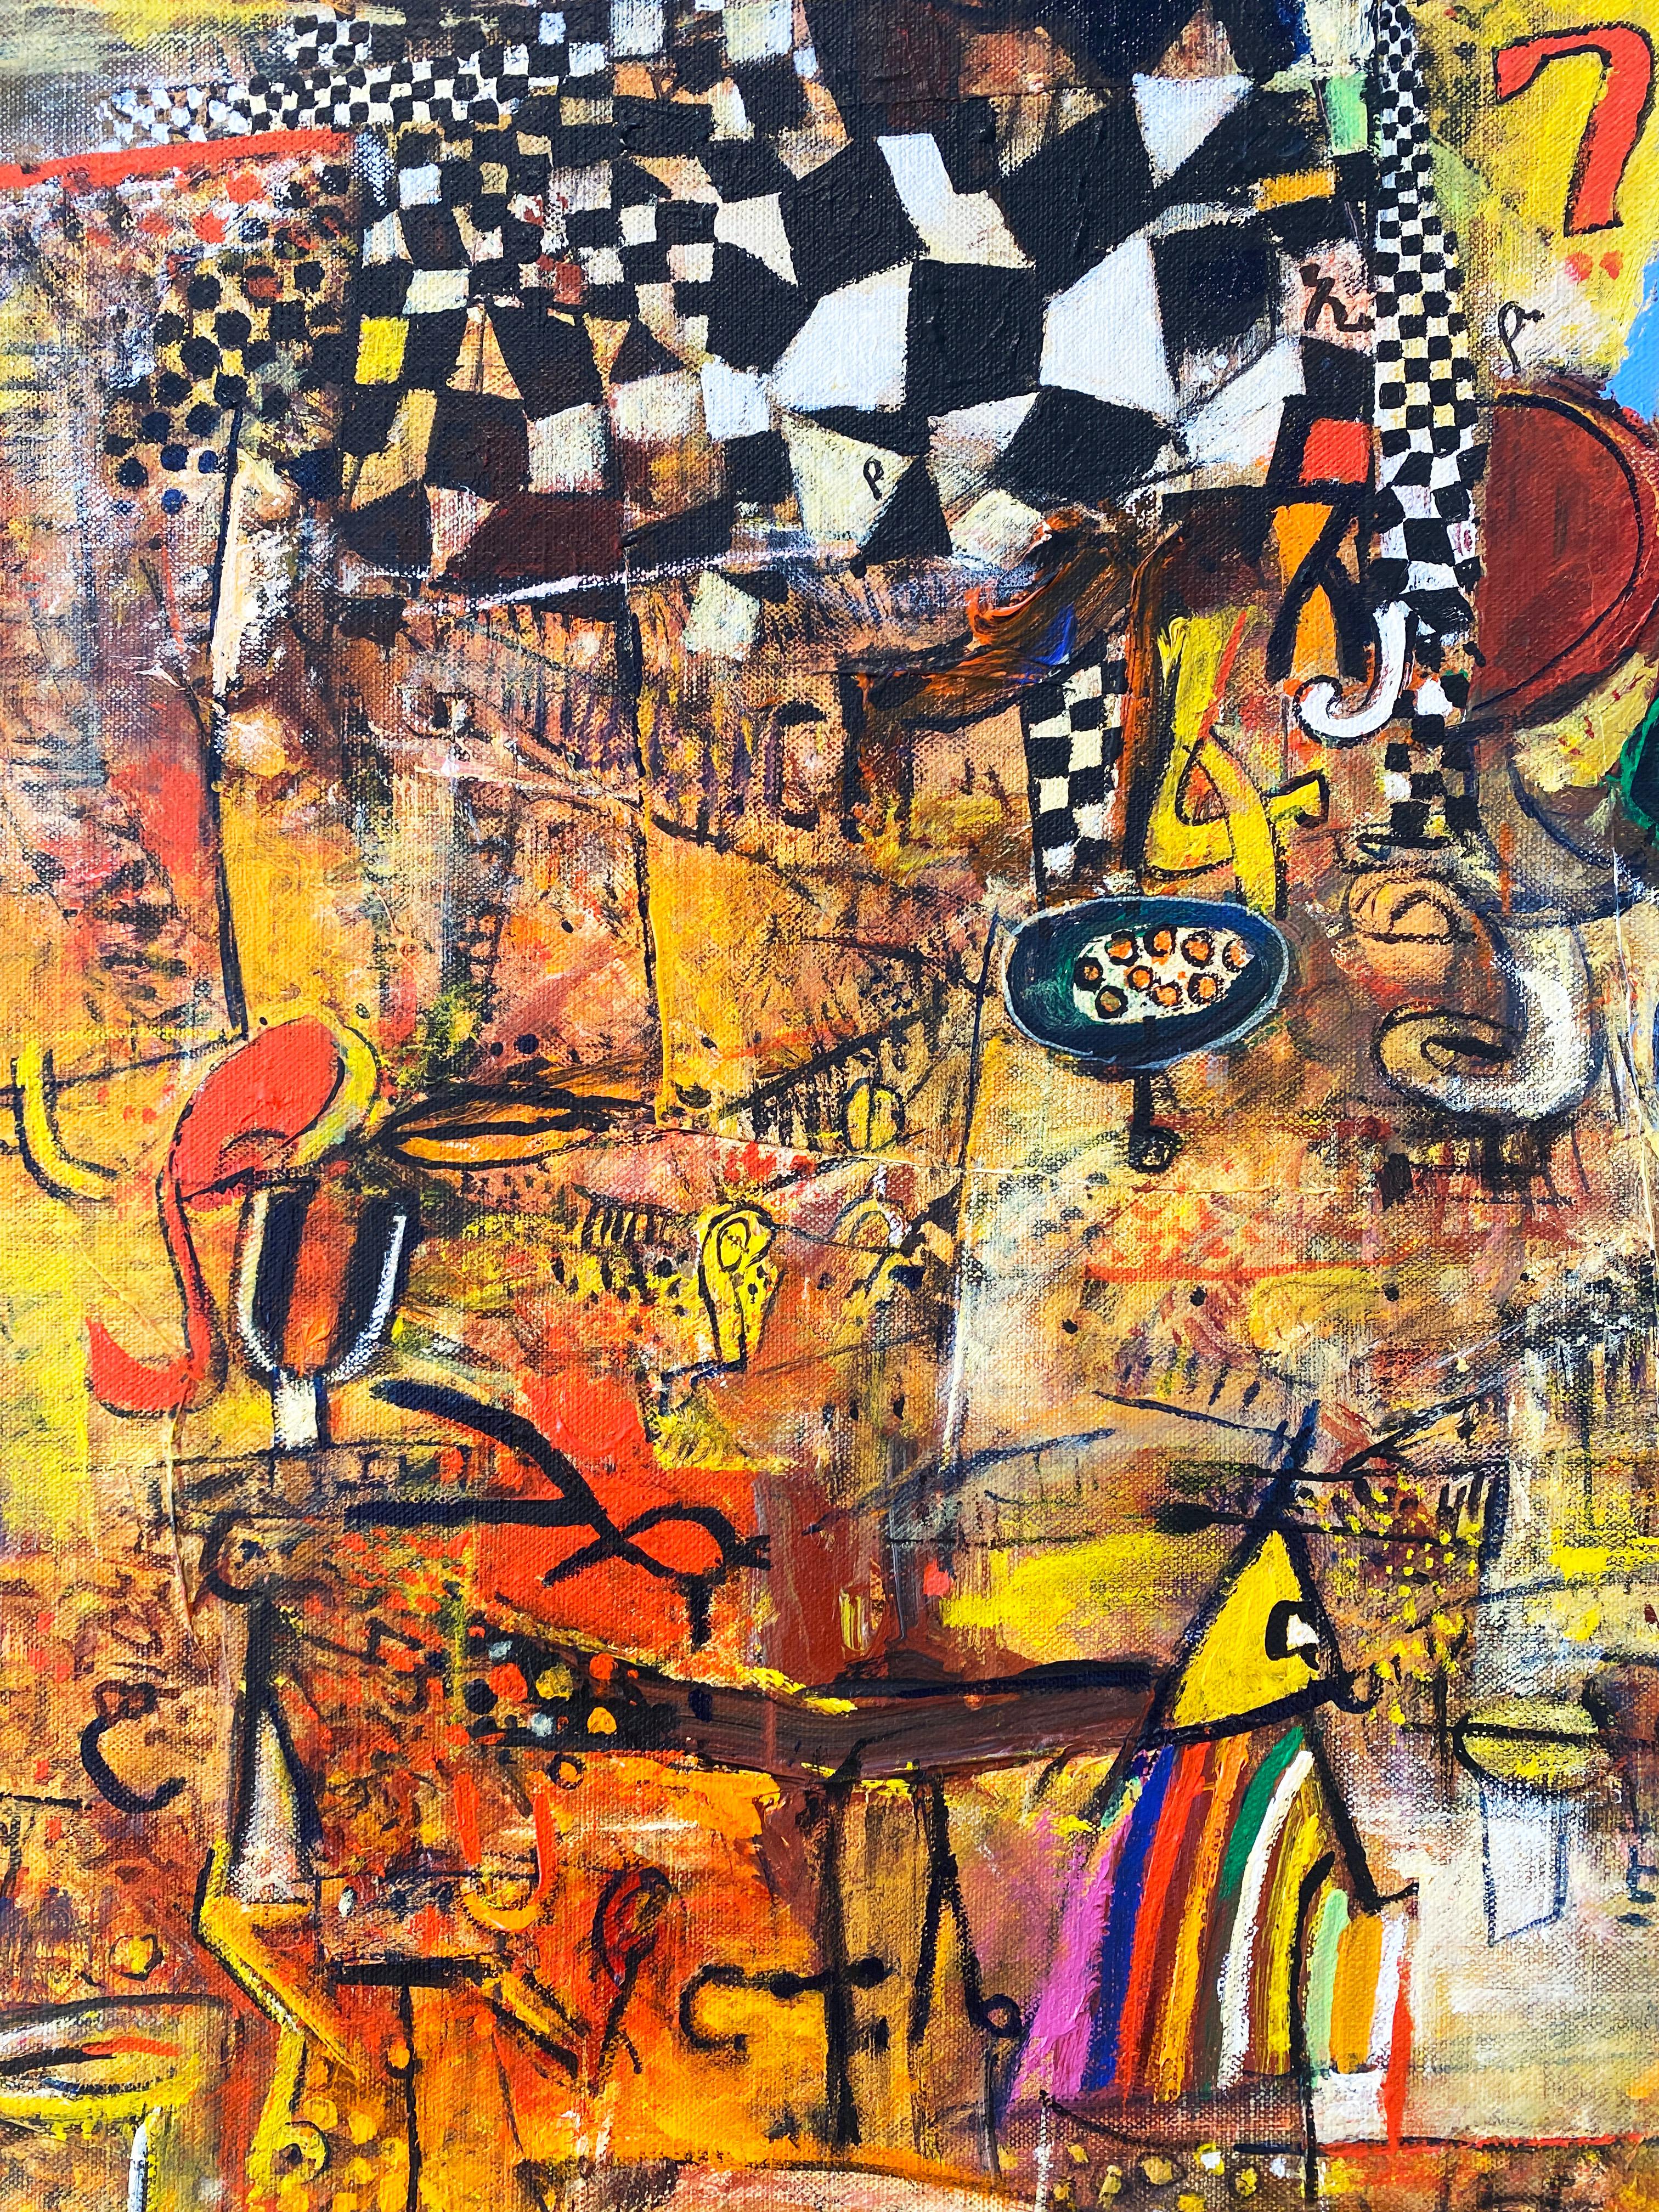 Semi-Abstract, Colorful Painting by African artist 'Central Park' - Brown Abstract Painting by Wosene Kosrof